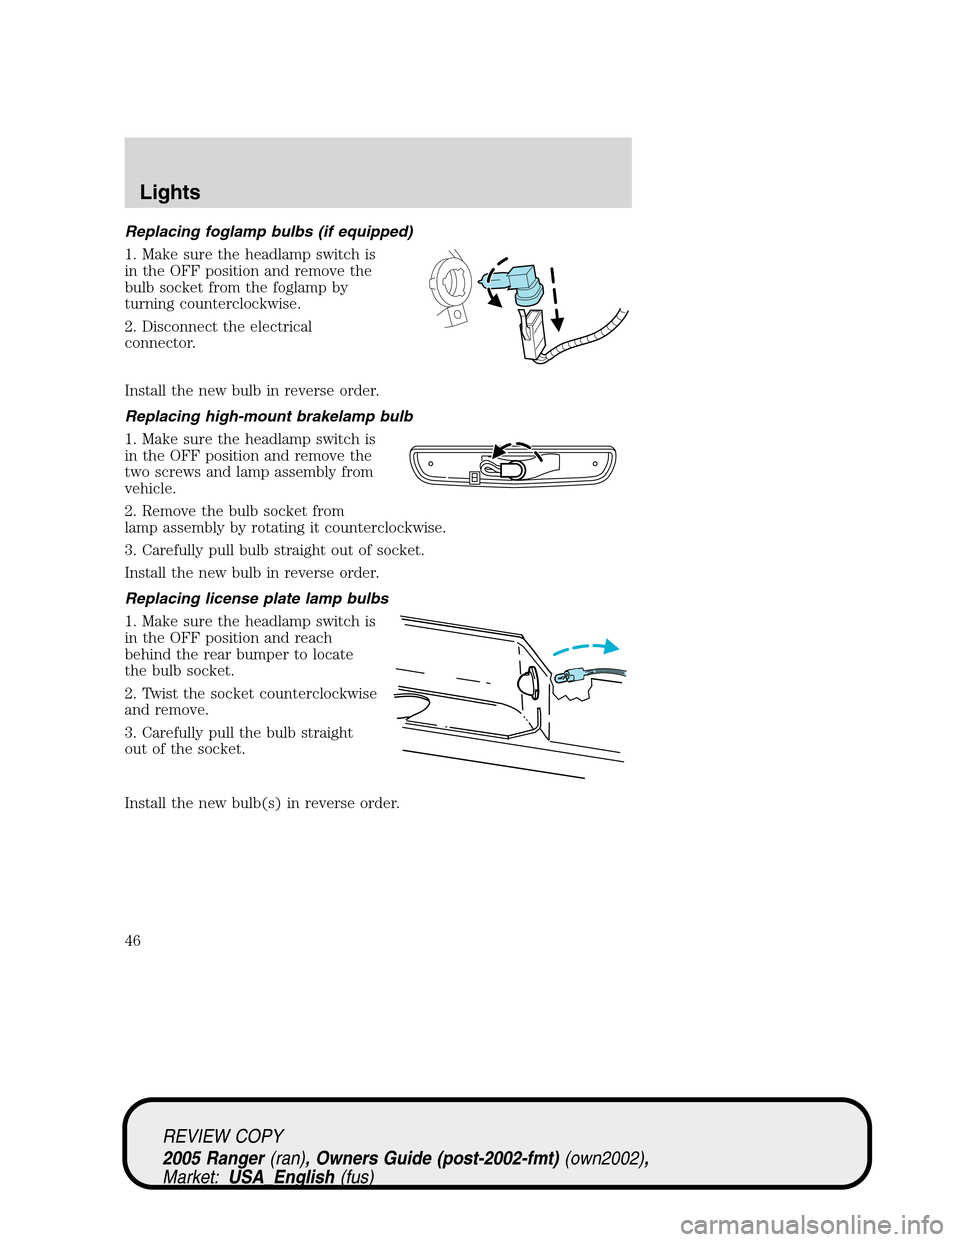 FORD RANGER 2005 2.G User Guide Replacing foglamp bulbs (if equipped)
1. Make sure the headlamp switch is
in the OFF position and remove the
bulb socket from the foglamp by
turning counterclockwise.
2. Disconnect the electrical
conn